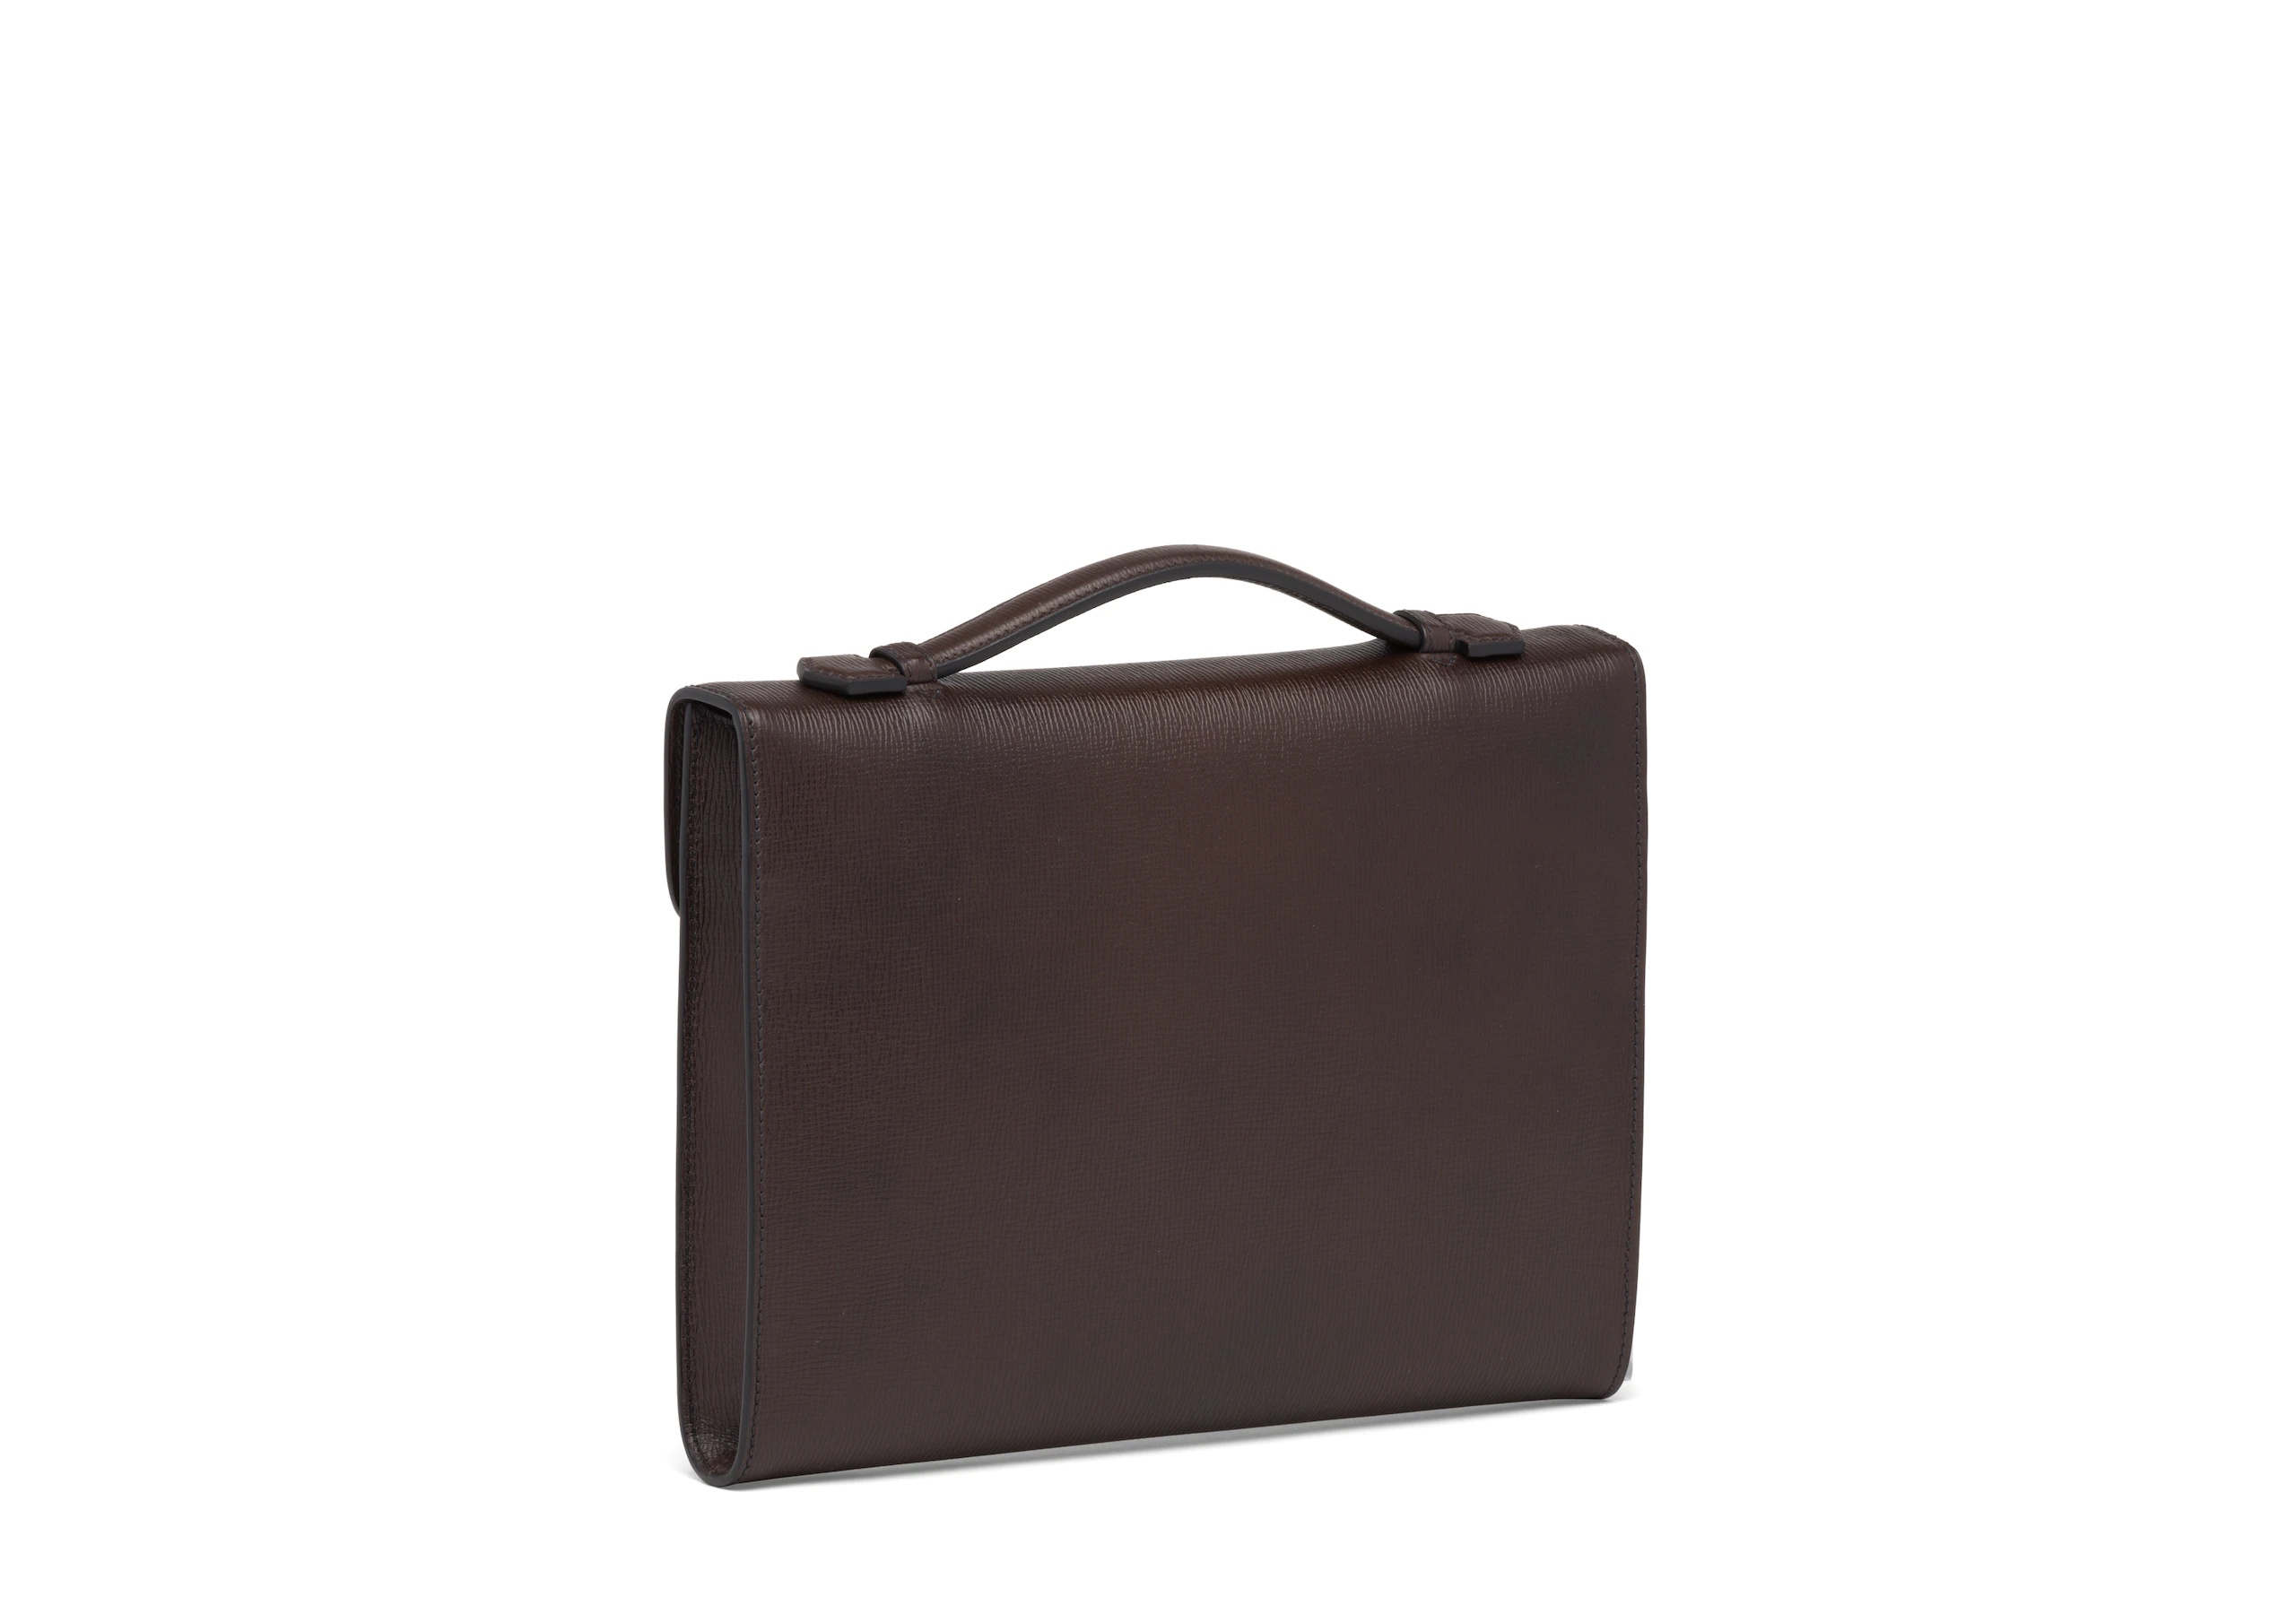 Crawford
St James Leather Document Holder Coffee - 2